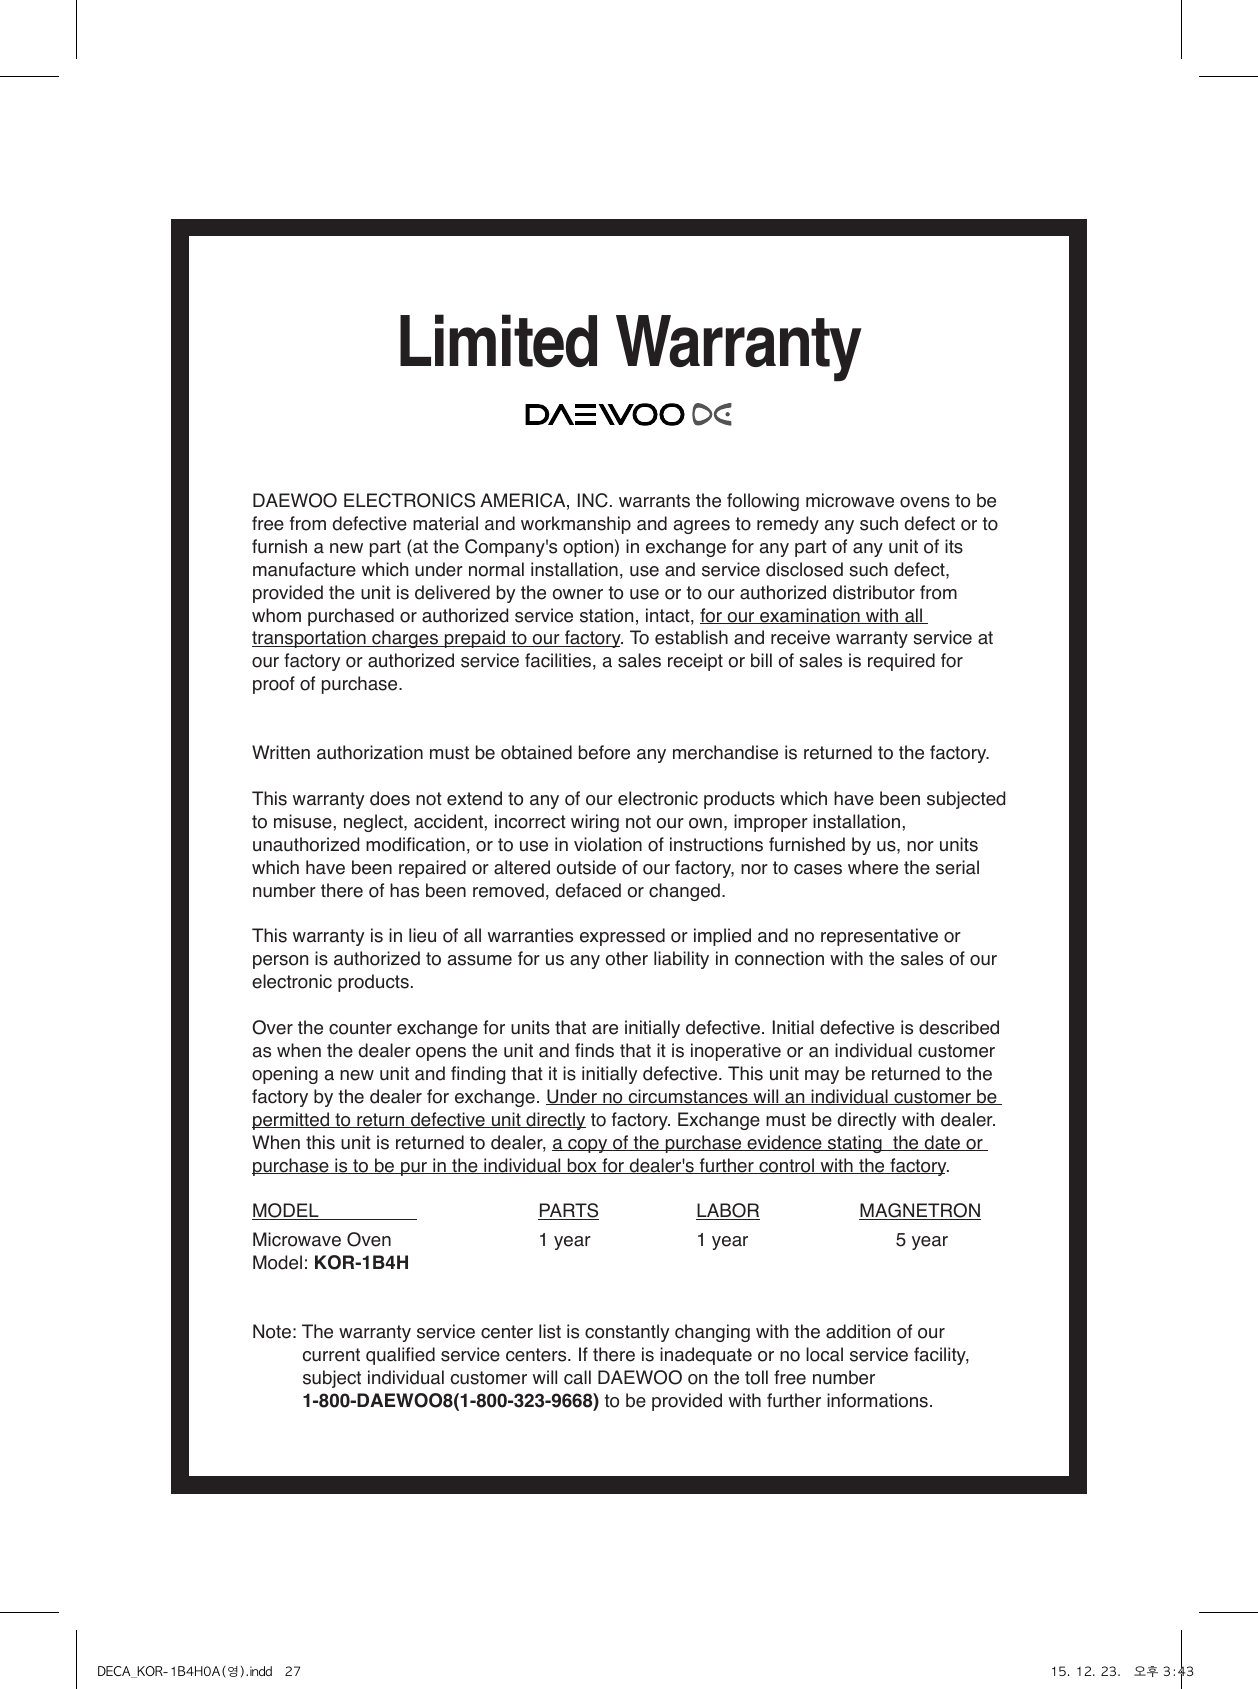 Limited WarrantyDAEWOO ELECTRONICS AMERICA, INC. warrants the following microwave ovens to be free from defective material and workmanship and agrees to remedy any such defect or to furnish a new part (at the Company&apos;s option) in exchange for any part of any unit of its manufacture which under normal installation, use and service disclosed such defect, provided the unit is delivered by the owner to use or to our authorized distributor from whom purchased or authorized service station, intact, for our examination with all transportation charges prepaid to our factory. To establish and receive warranty service at our factory or authorized service facilities, a sales receipt or bill of sales is required for proof of purchase.Written authorization must be obtained before any merchandise is returned to the factory.This warranty does not extend to any of our electronic products which have been subjected to misuse, neglect, accident, incorrect wiring not our own, improper installation, unauthorized modification, or to use in violation of instructions furnished by us, nor units which have been repaired or altered outside of our factory, nor to cases where the serial number there of has been removed, defaced or changed.This warranty is in lieu of all warranties expressed or implied and no representative or person is authorized to assume for us any other liability in connection with the sales of our electronic products.Over the counter exchange for units that are initially defective. Initial defective is described as when the dealer opens the unit and finds that it is inoperative or an individual customer opening a new unit and finding that it is initially defective. This unit may be returned to the factory by the dealer for exchange. Under no circumstances will an individual customer be permitted to return defective unit directly to factory. Exchange must be directly with dealer. When this unit is returned to dealer, a copy of the purchase evidence stating  the date or purchase is to be pur in the individual box for dealer&apos;s further control with the factory.MODEL                      PARTS  LABOR  MAGNETRONMicrowave Oven  1 year  1 year         5 yearModel: KOR-1B4HNote: The warranty service center list is constantly changing with the addition of our current qualified service centers. If there is inadequate or no local service facility, subject individual customer will call DAEWOO on the toll free number 1-800-DAEWOO8(1-800-323-9668) to be provided with further informations.DECA_KOR-1B4H0A(영).indd   27 15. 12. 23.   오후 3:43